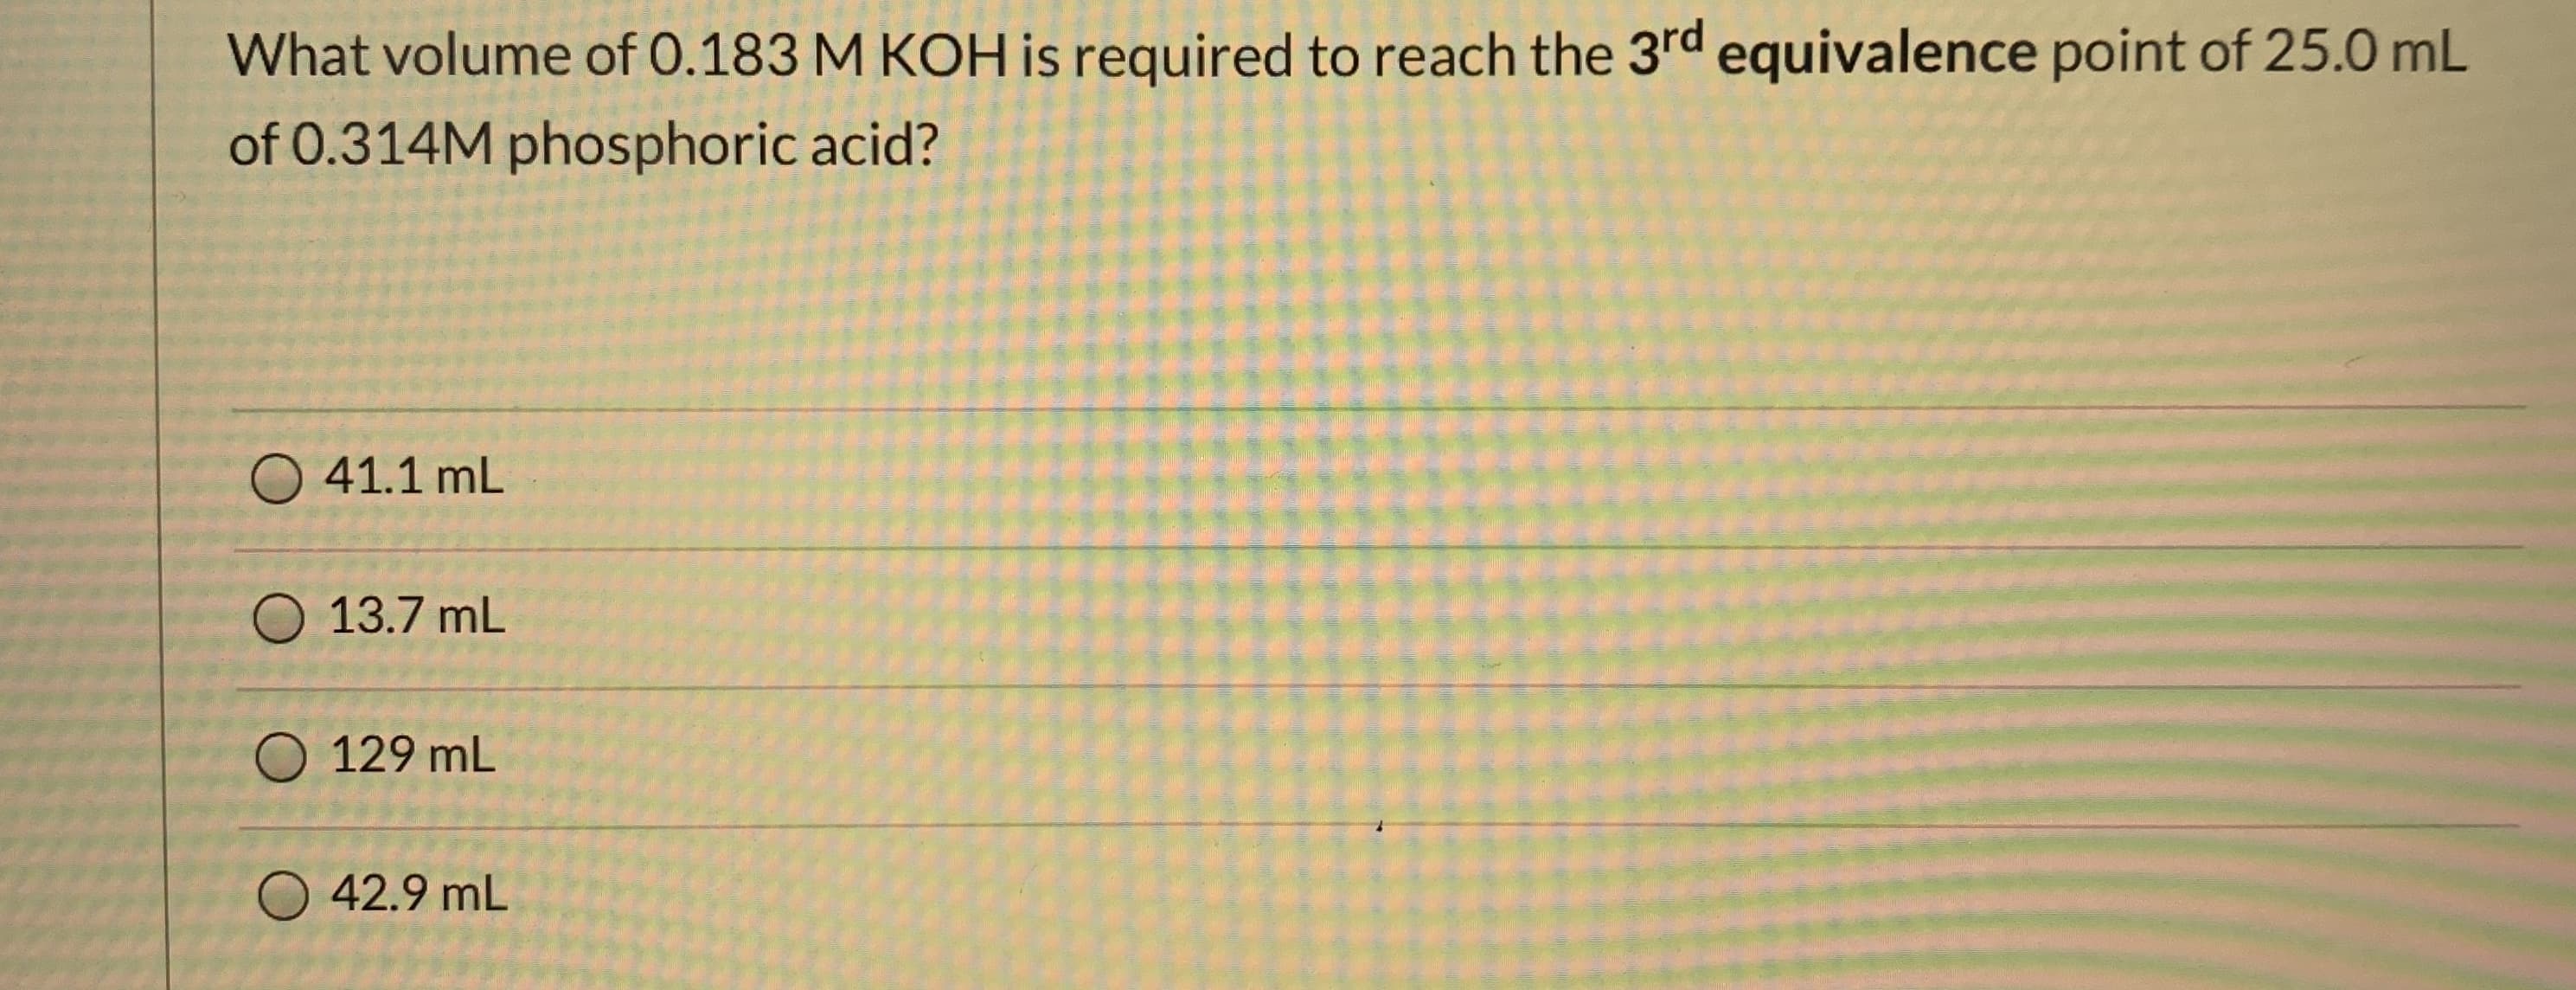 What volume of 0.183 M KOH is required to reach the 3rd equivalence point of 25.0 mL
of 0.314M phosphoric acid?
41.1 mL
13.7 mL
O 129 mL
O 42.9 mL
